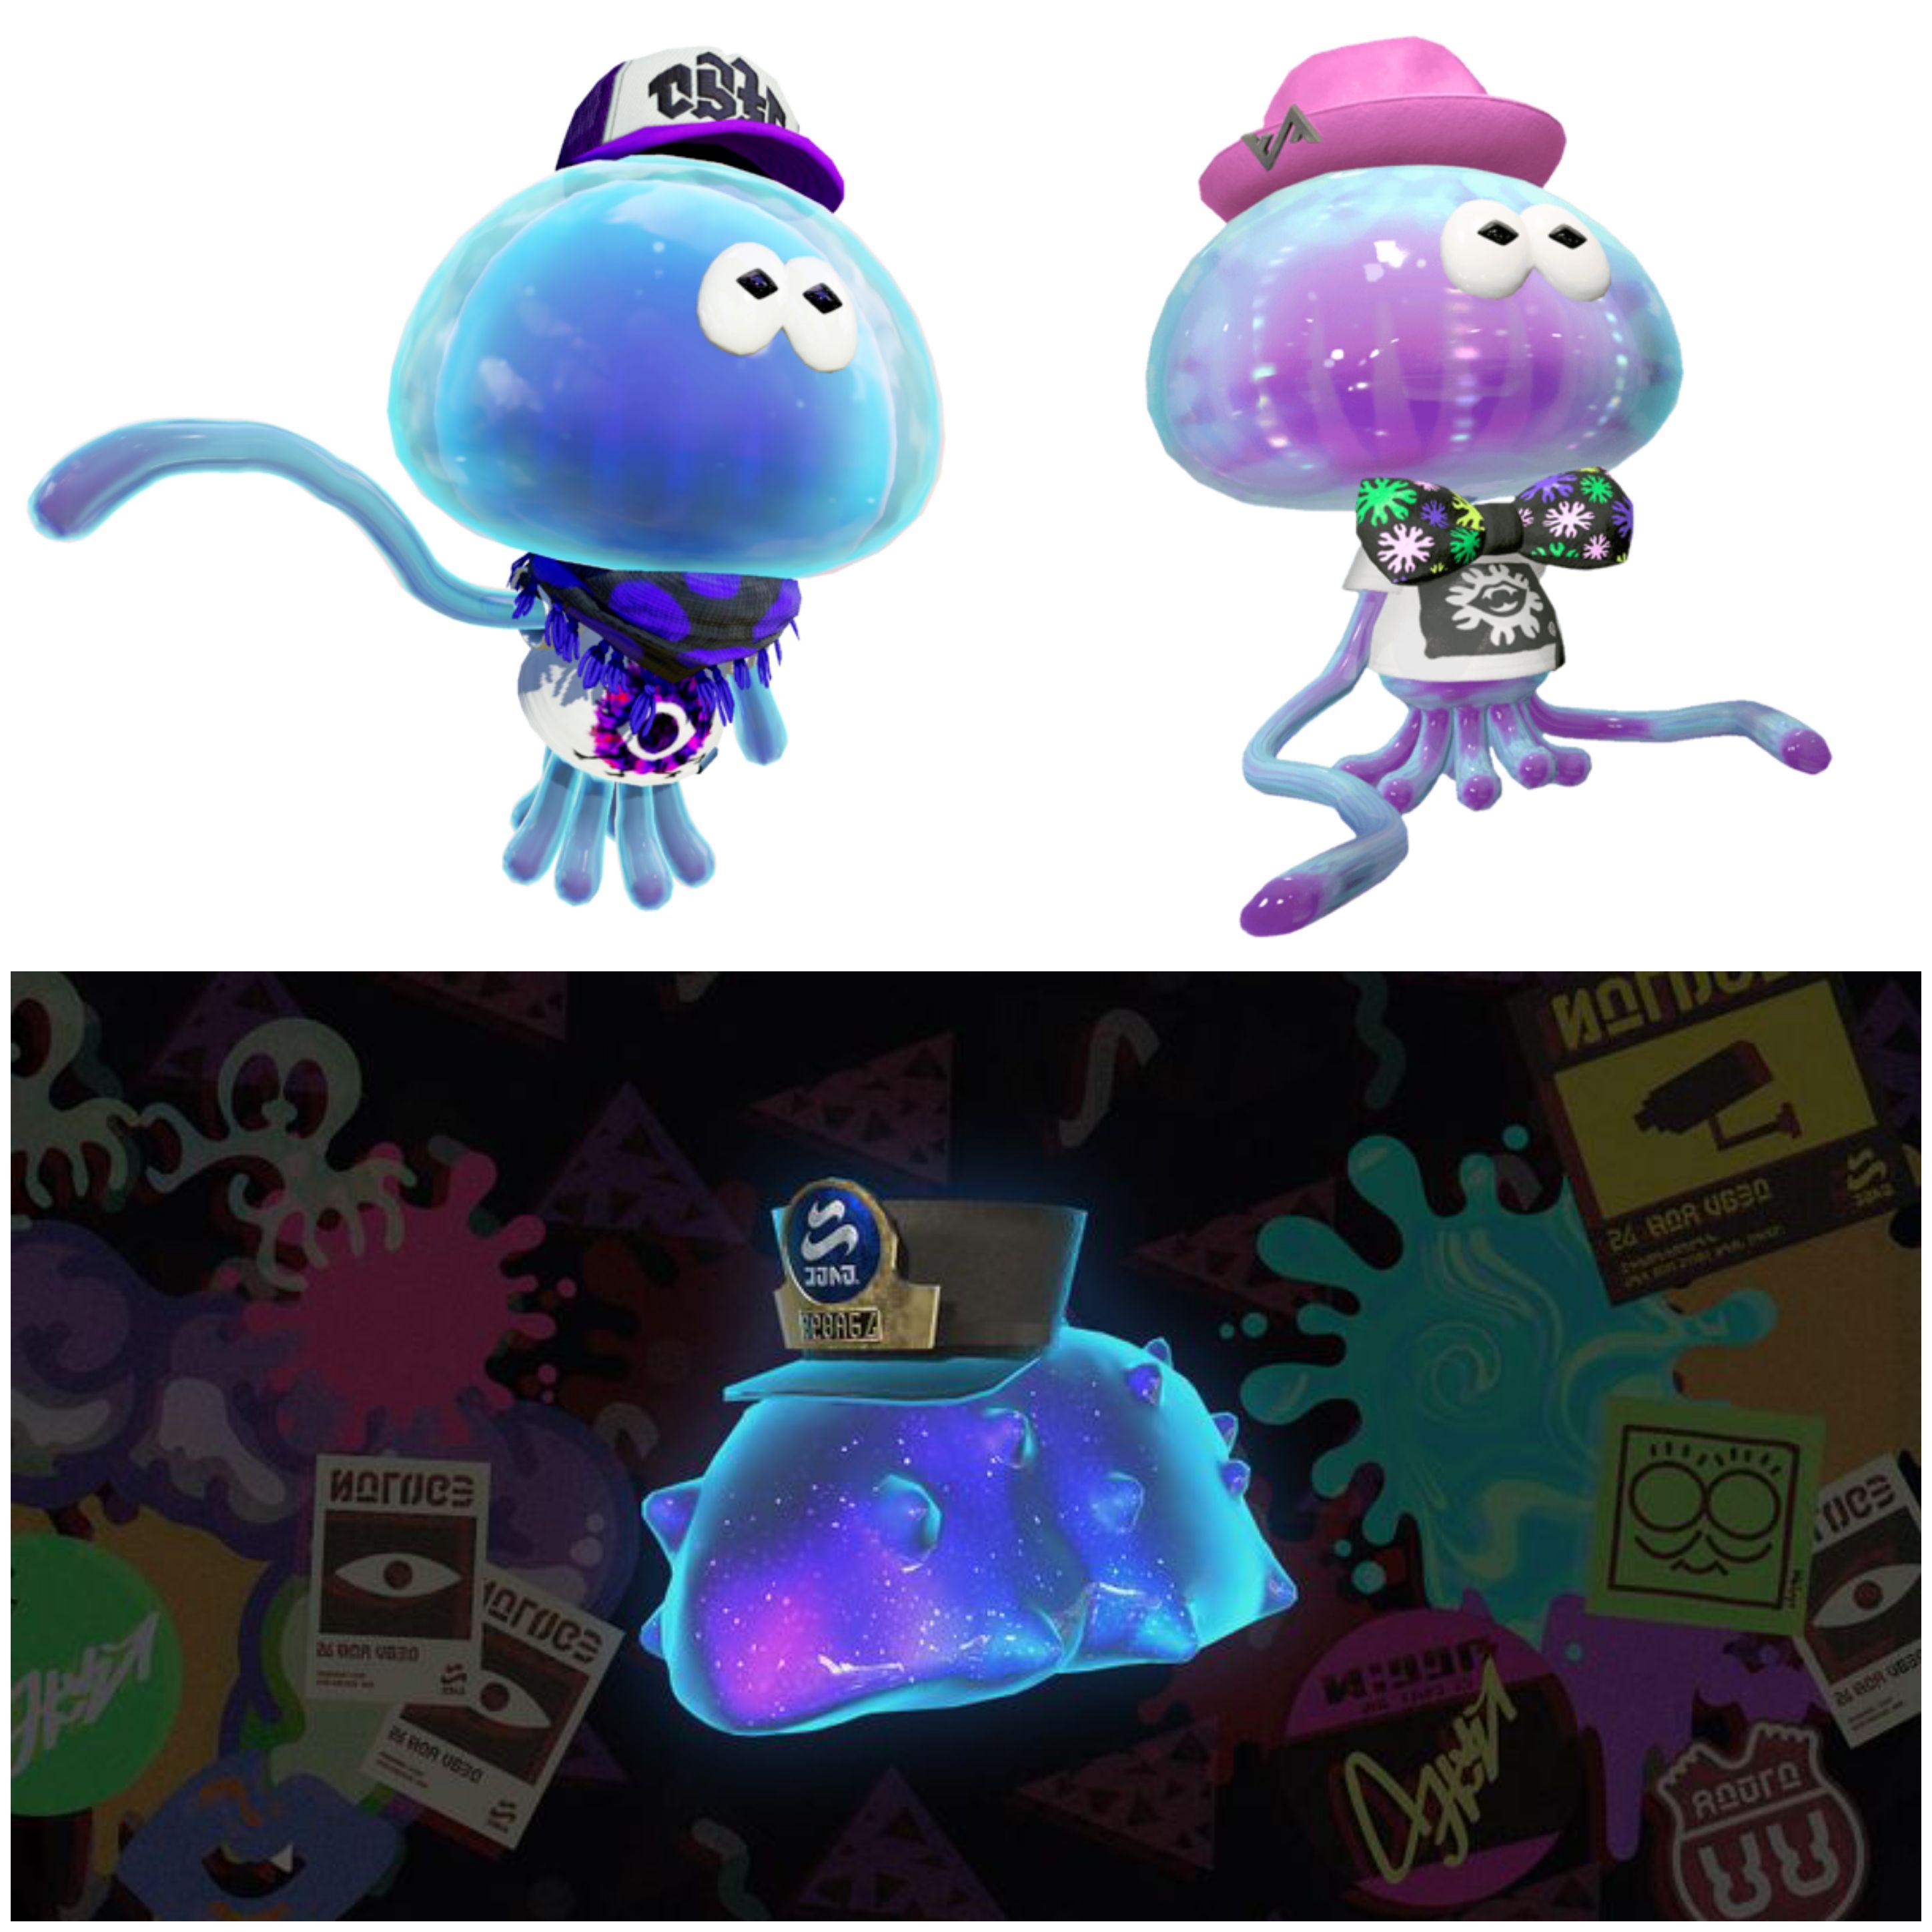 Wide variety of products: Choose from a diverse selection of merchandise including apparel, accessories, collectibles, and more.
Perfect for fans: Whether you're a long-time Splatoon enthusiast or a newcomer to the franchise, our Captain C Q Cumber merchandise is ideal for any fan.